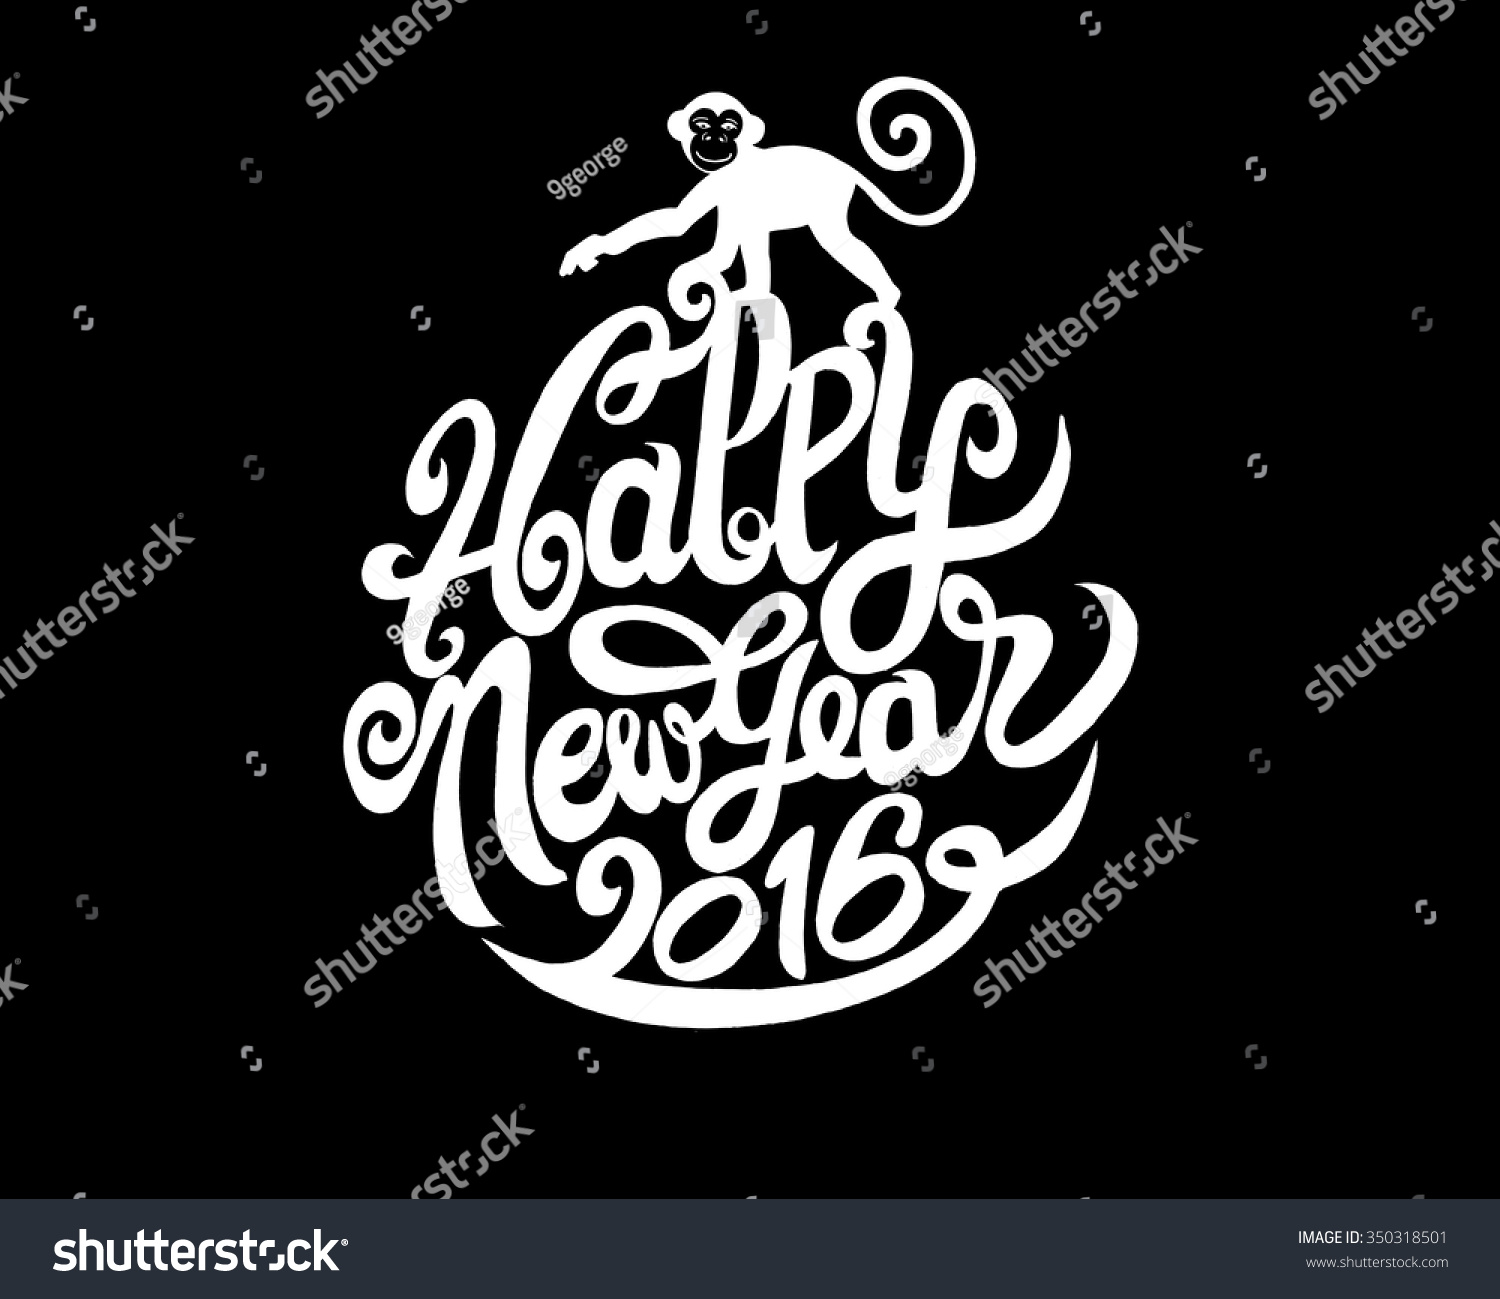 Hand Drawing Doodle Of Happy New Year. Vector Illustration. - 350318501